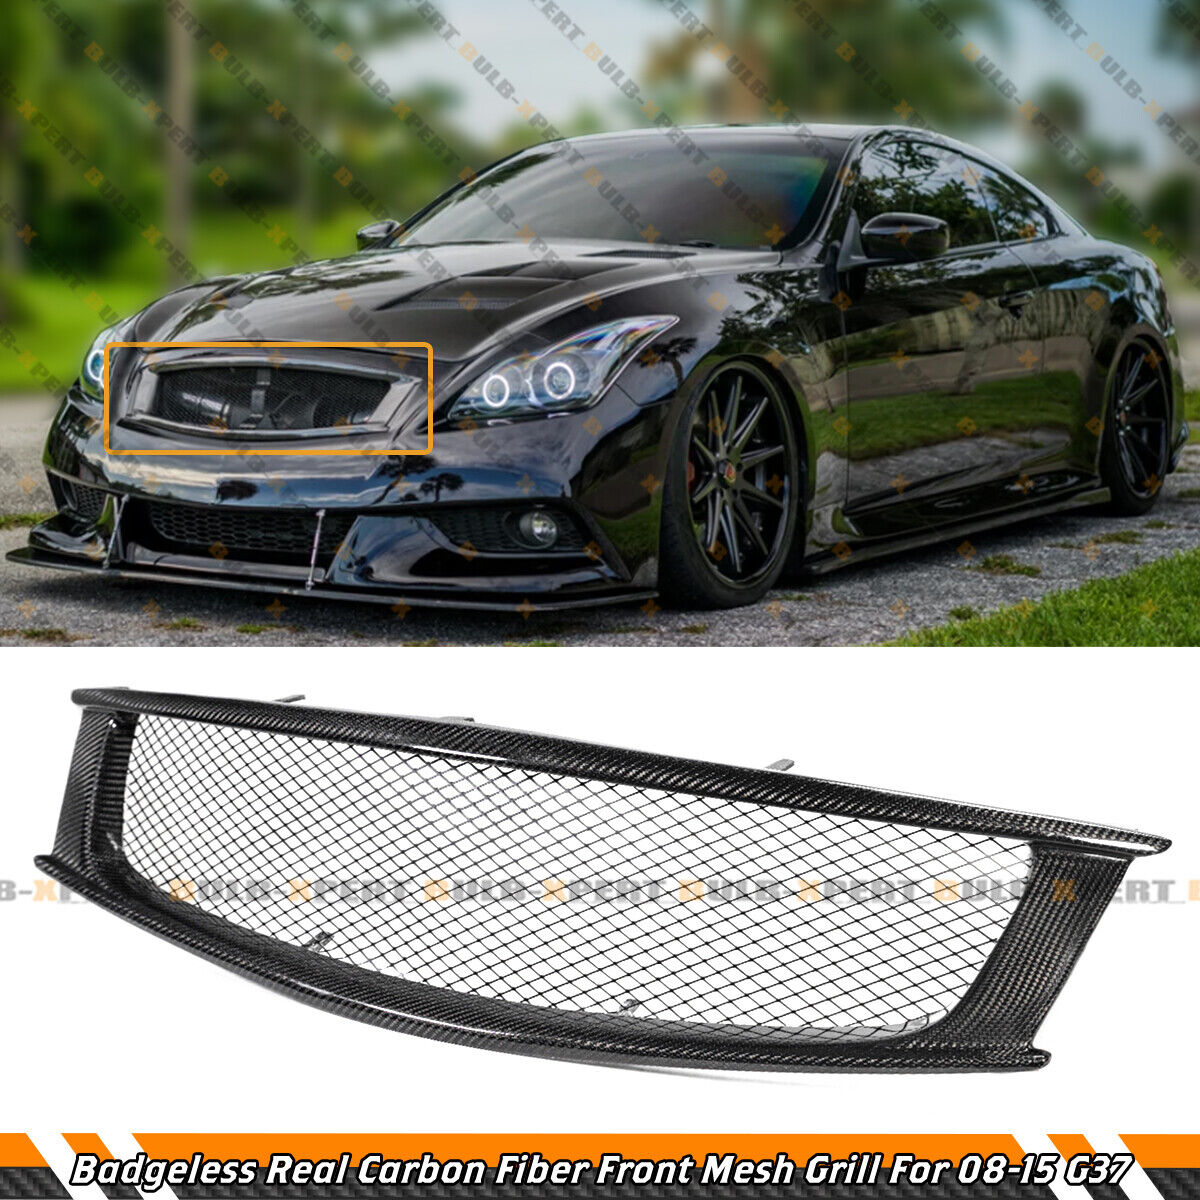 FOR 2008-15 INFINITI G37 Q60 2DR COUPE REAL CARBON FIBER FRONT MESH GRILL GRILLE